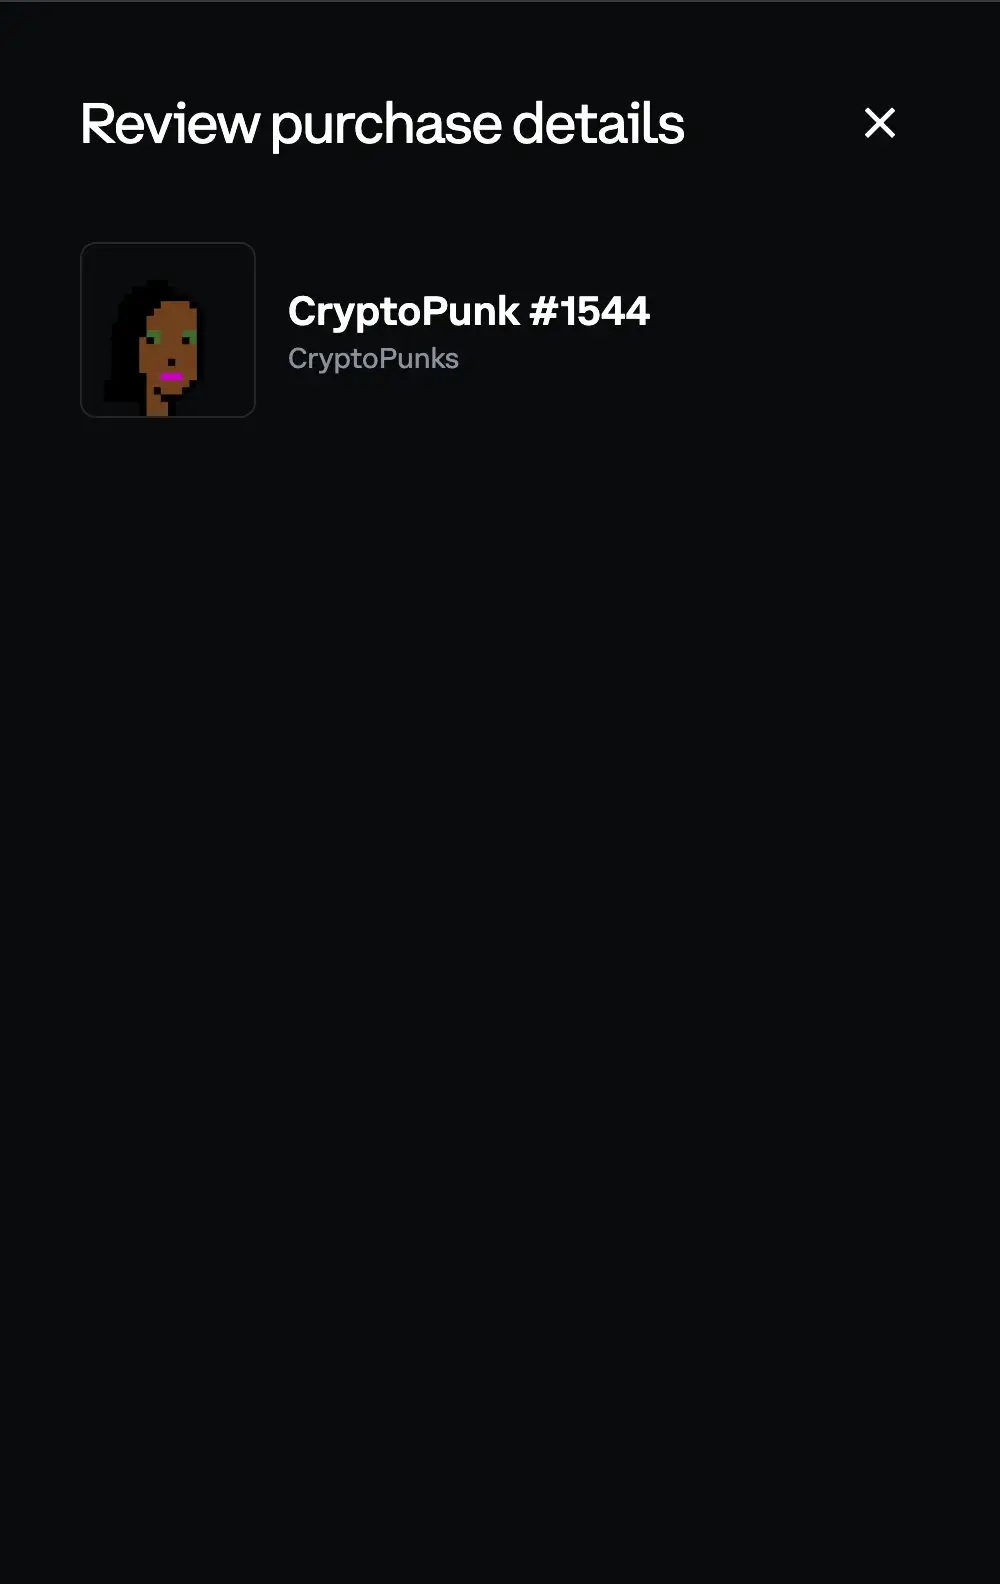 Crypto Punk Purchase Details